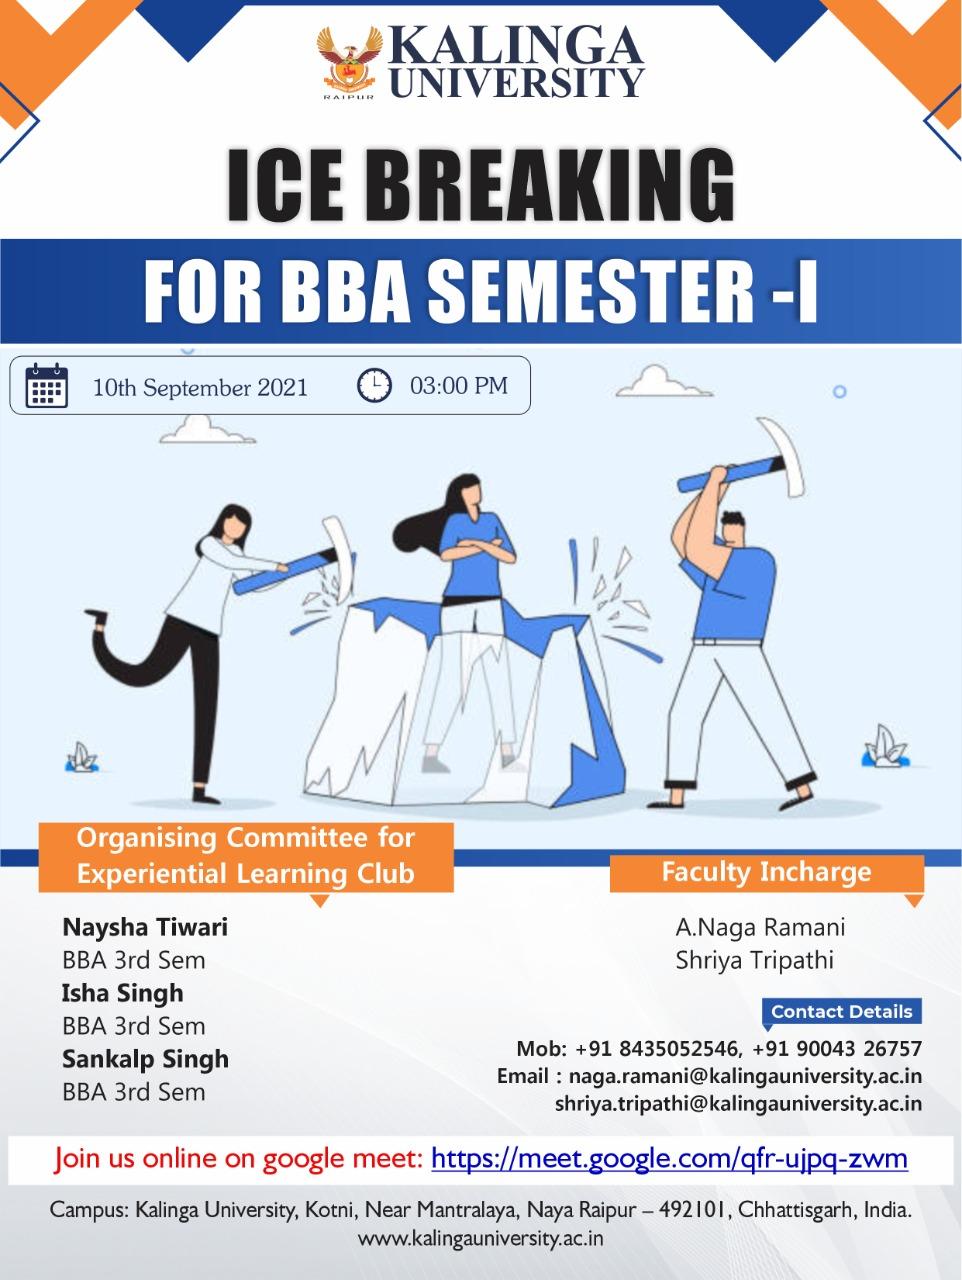 Kalinga University conduct ice-breaking session for their new students